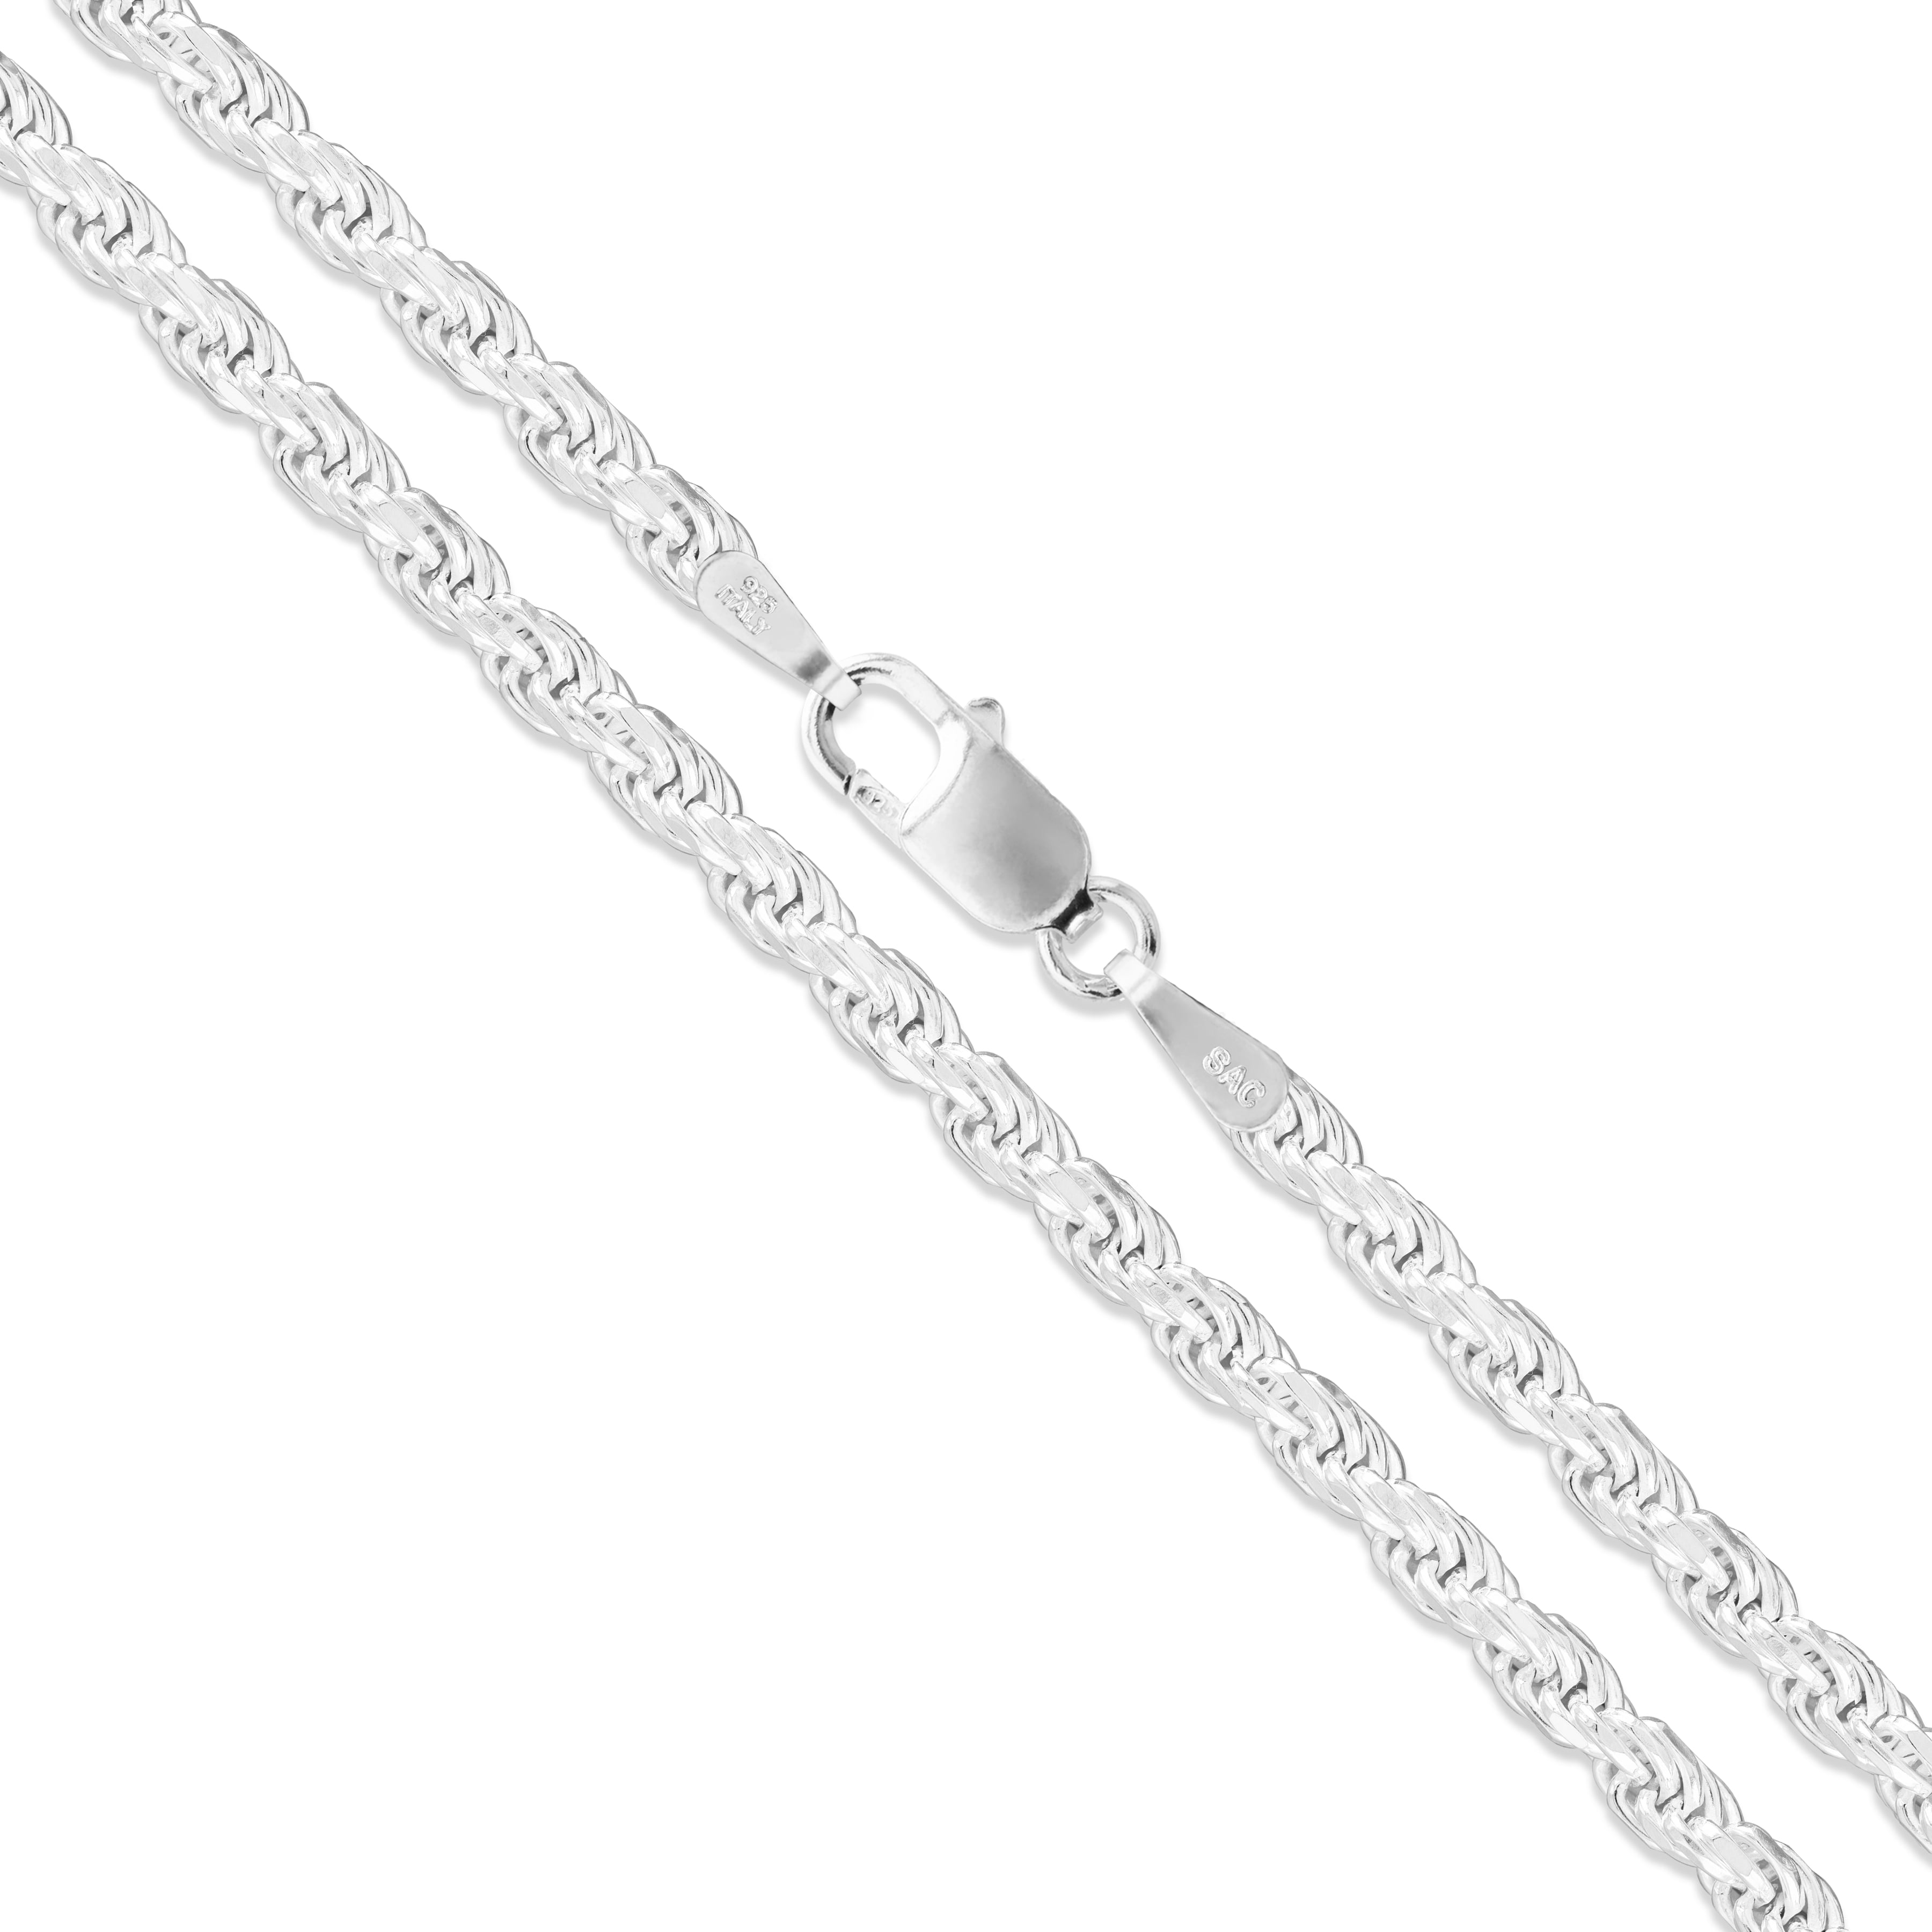 Unisex  50cm Long White Gold Plated 0.7mm Bone Thin Chain Necklace UK Seller 